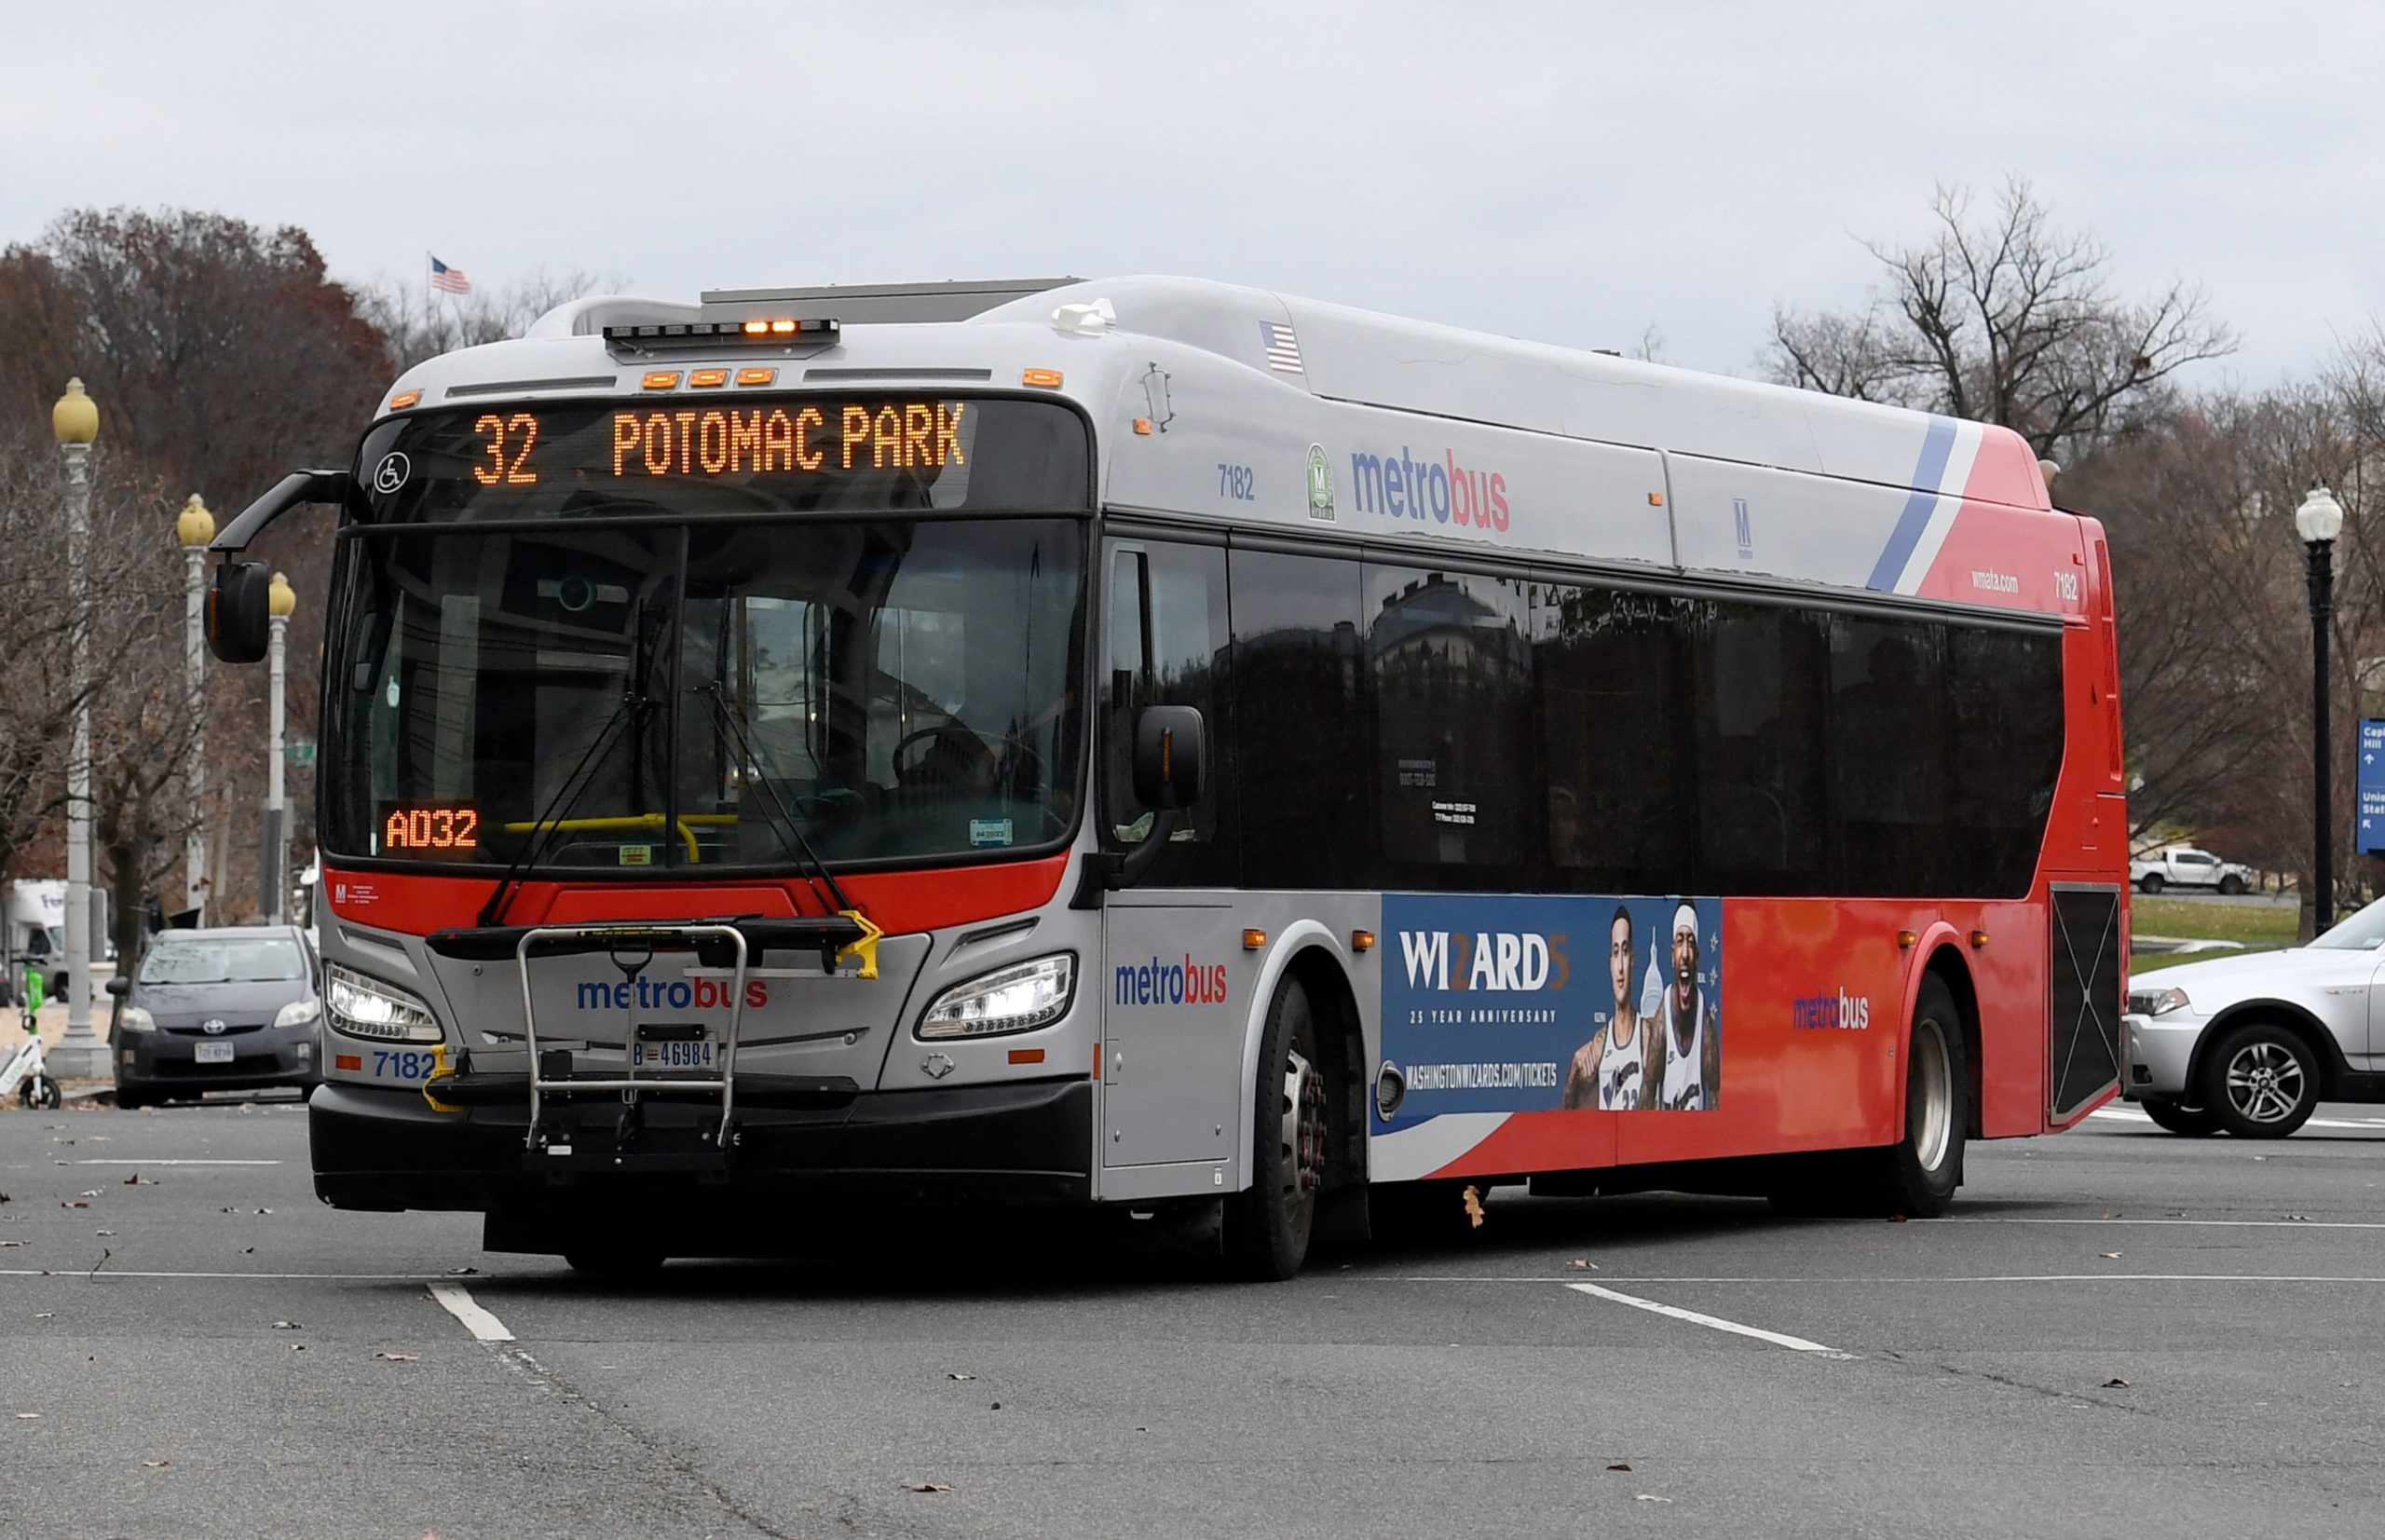 A bus is seen in Washington, DC, on December 12, 2022. - The Washington government voted to institute free bus rides for all starting in the summer of 2023. (Photo by OLIVIER DOULIERY / AFP) (Photo by OLIVIER DOULIERY/AFP via Getty Images)